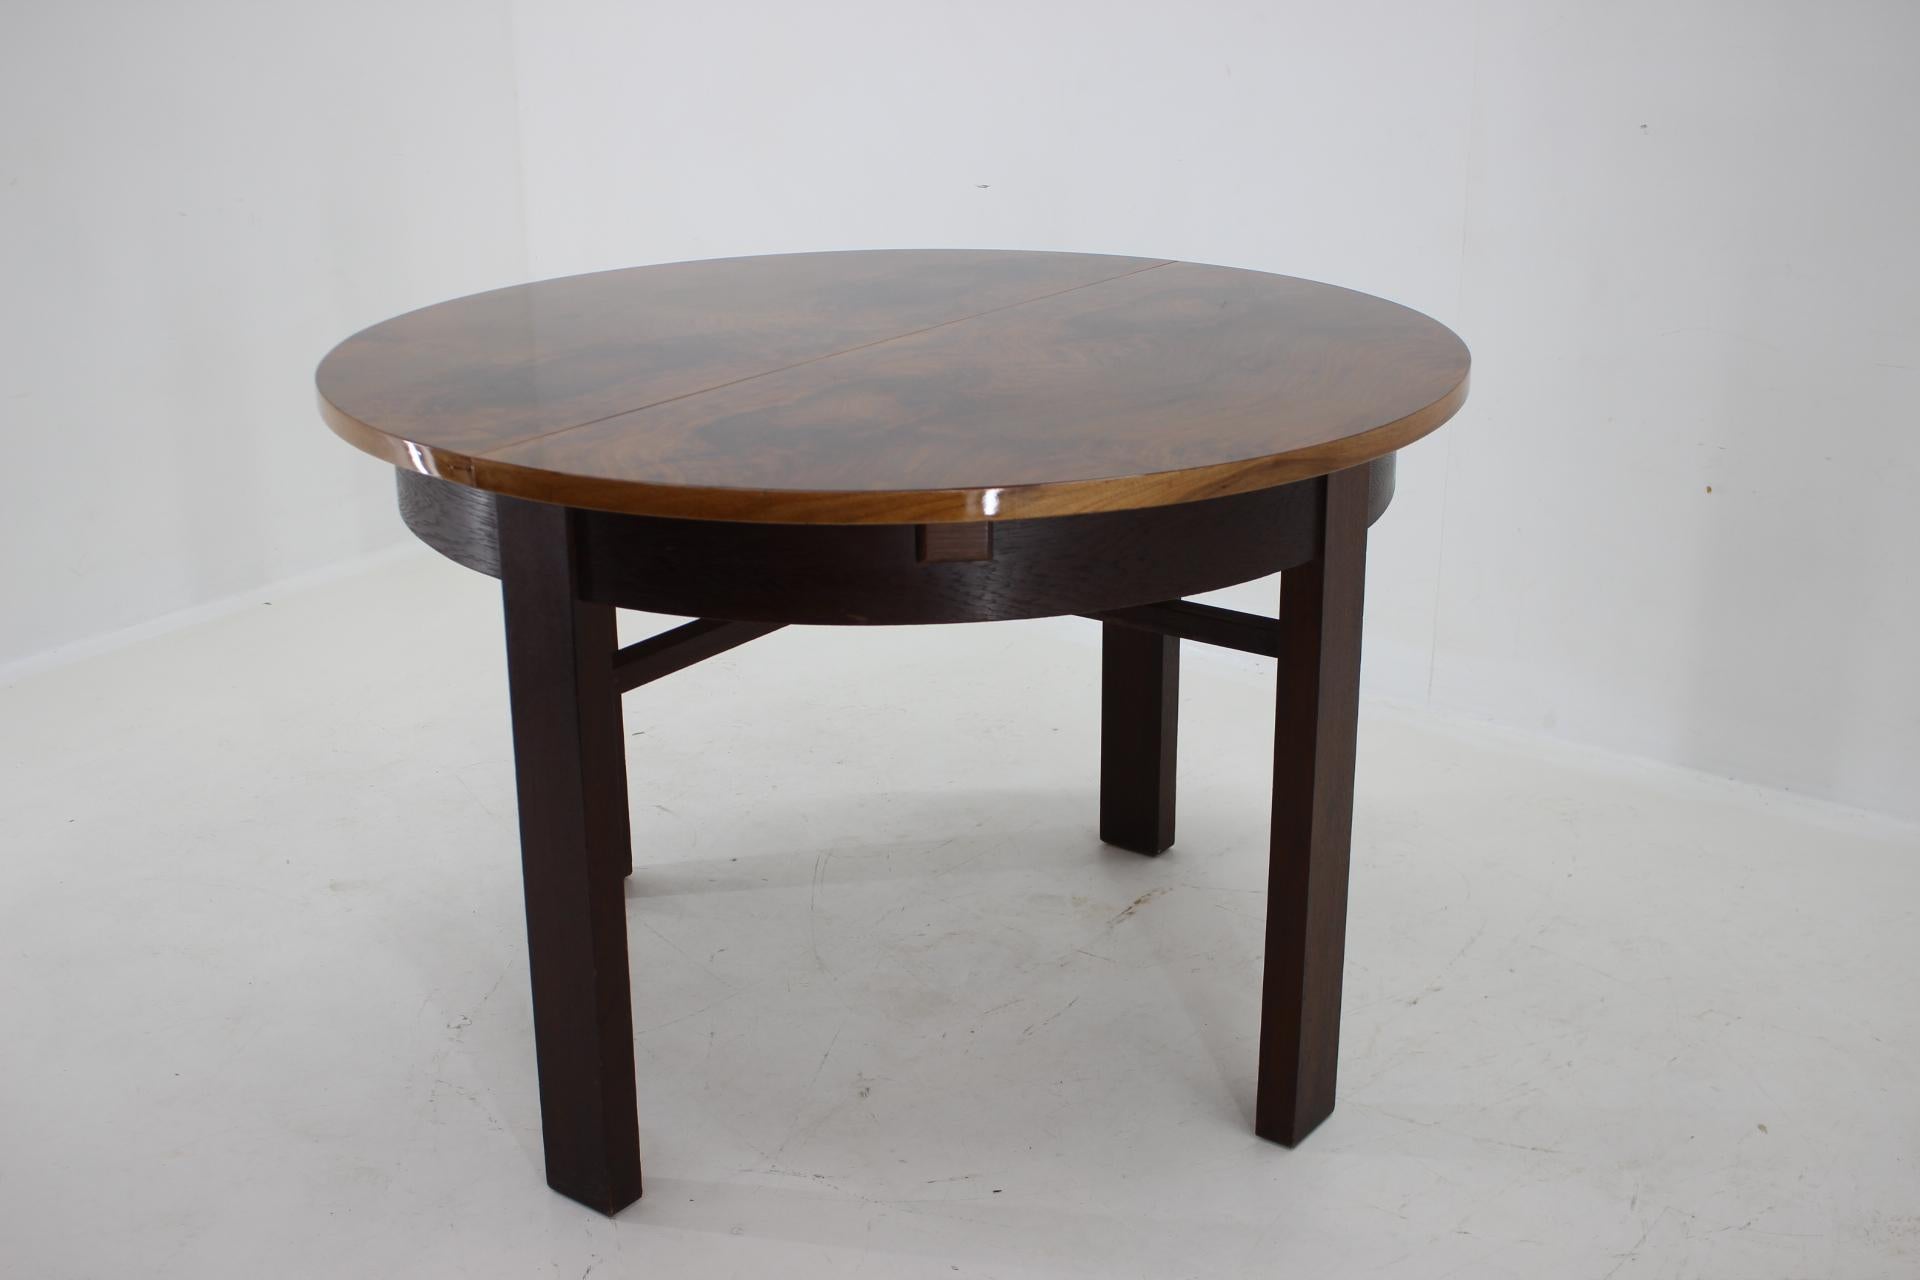 1930s Round /Oval Art Deco Extendable Dining Table in Walnut, Restored  For Sale 5